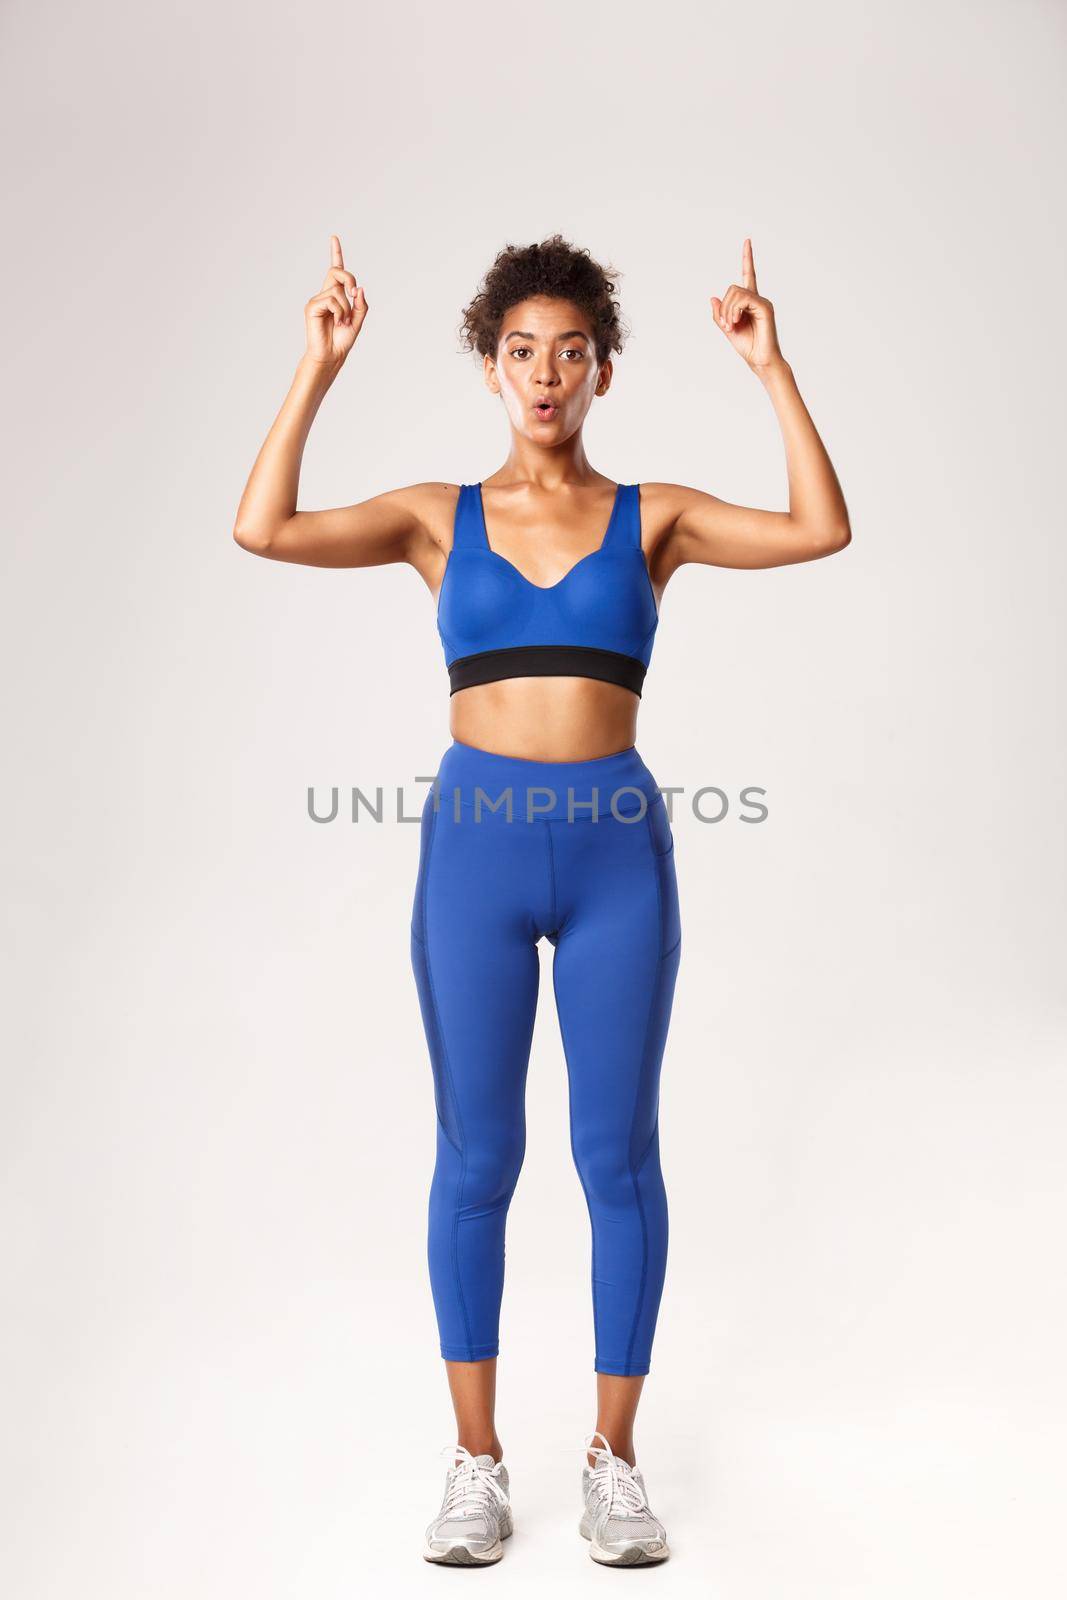 Full length of amazed good-looking fitness girl in blue sports bra and leggings, pointing fingers up, showing promo about workout or gym, standing over white background.